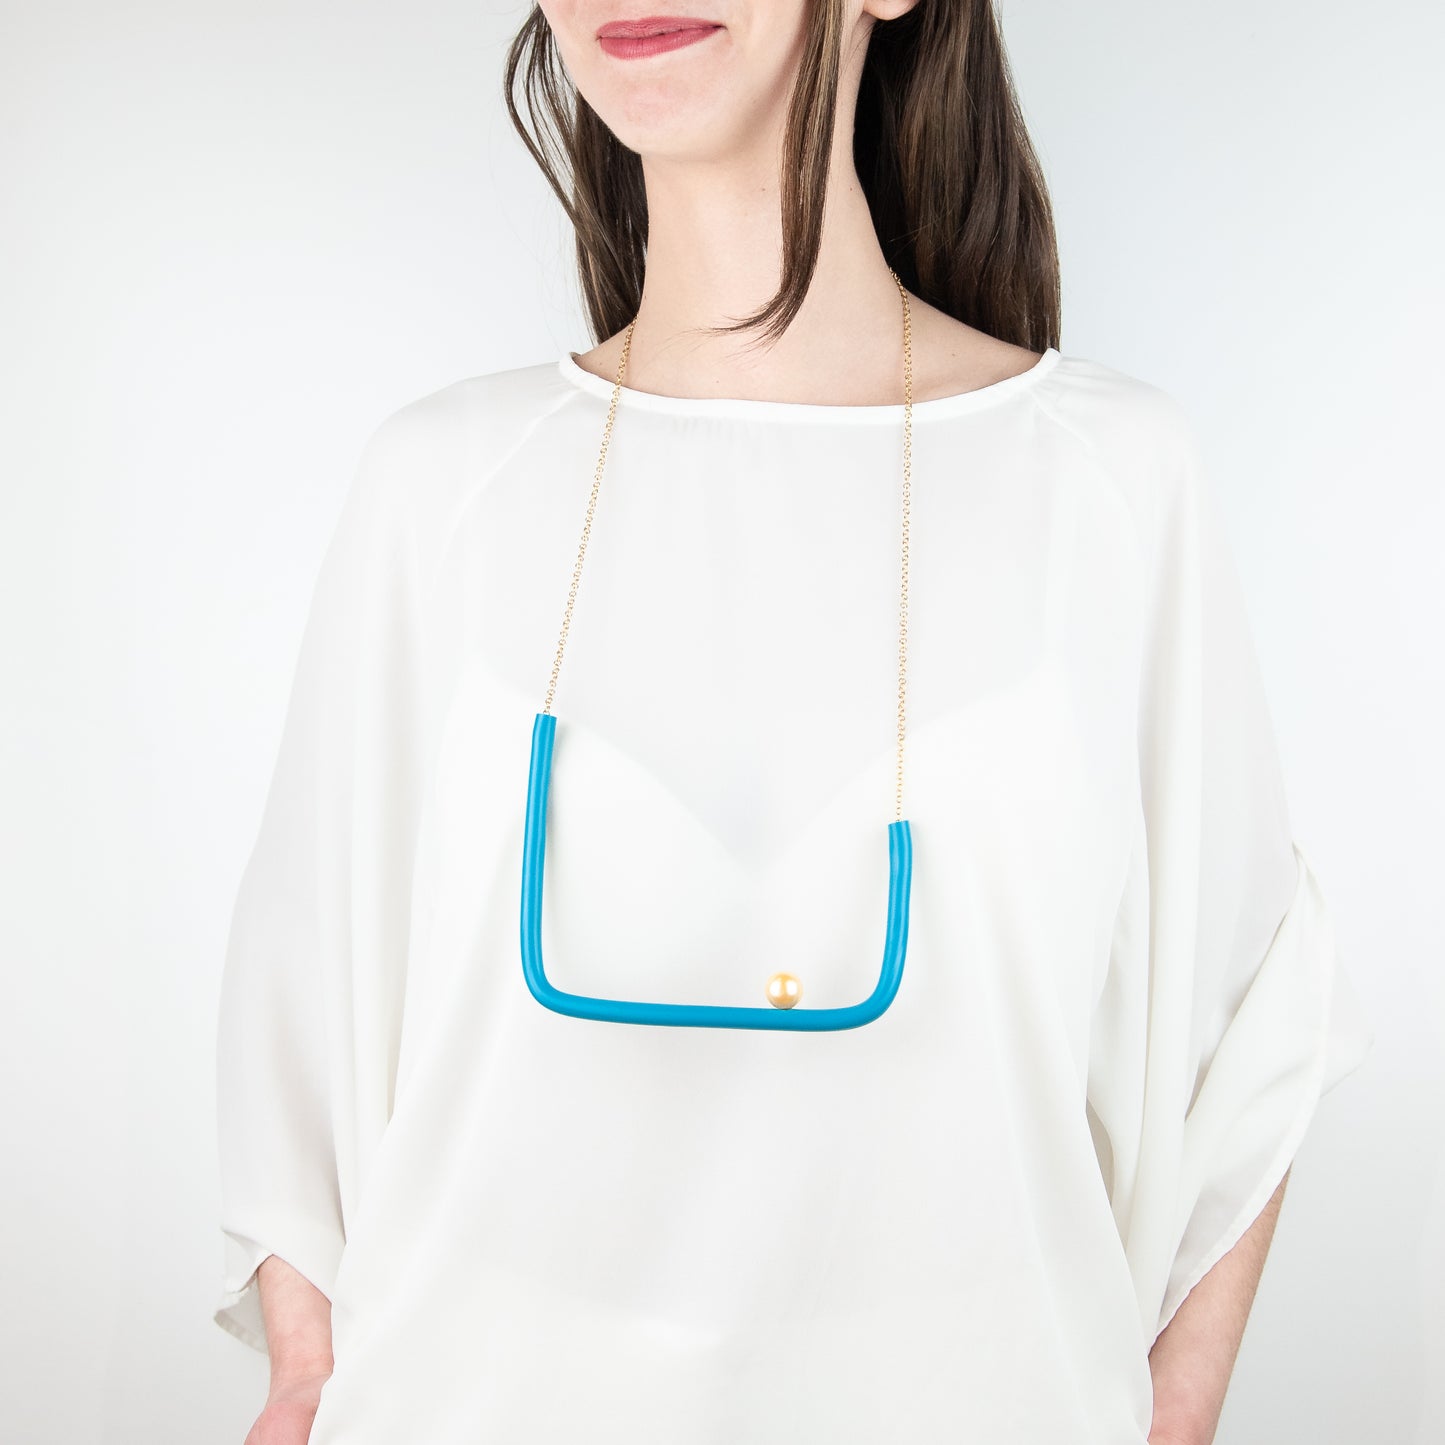 BILICO square necklace - teal color / gold pearl